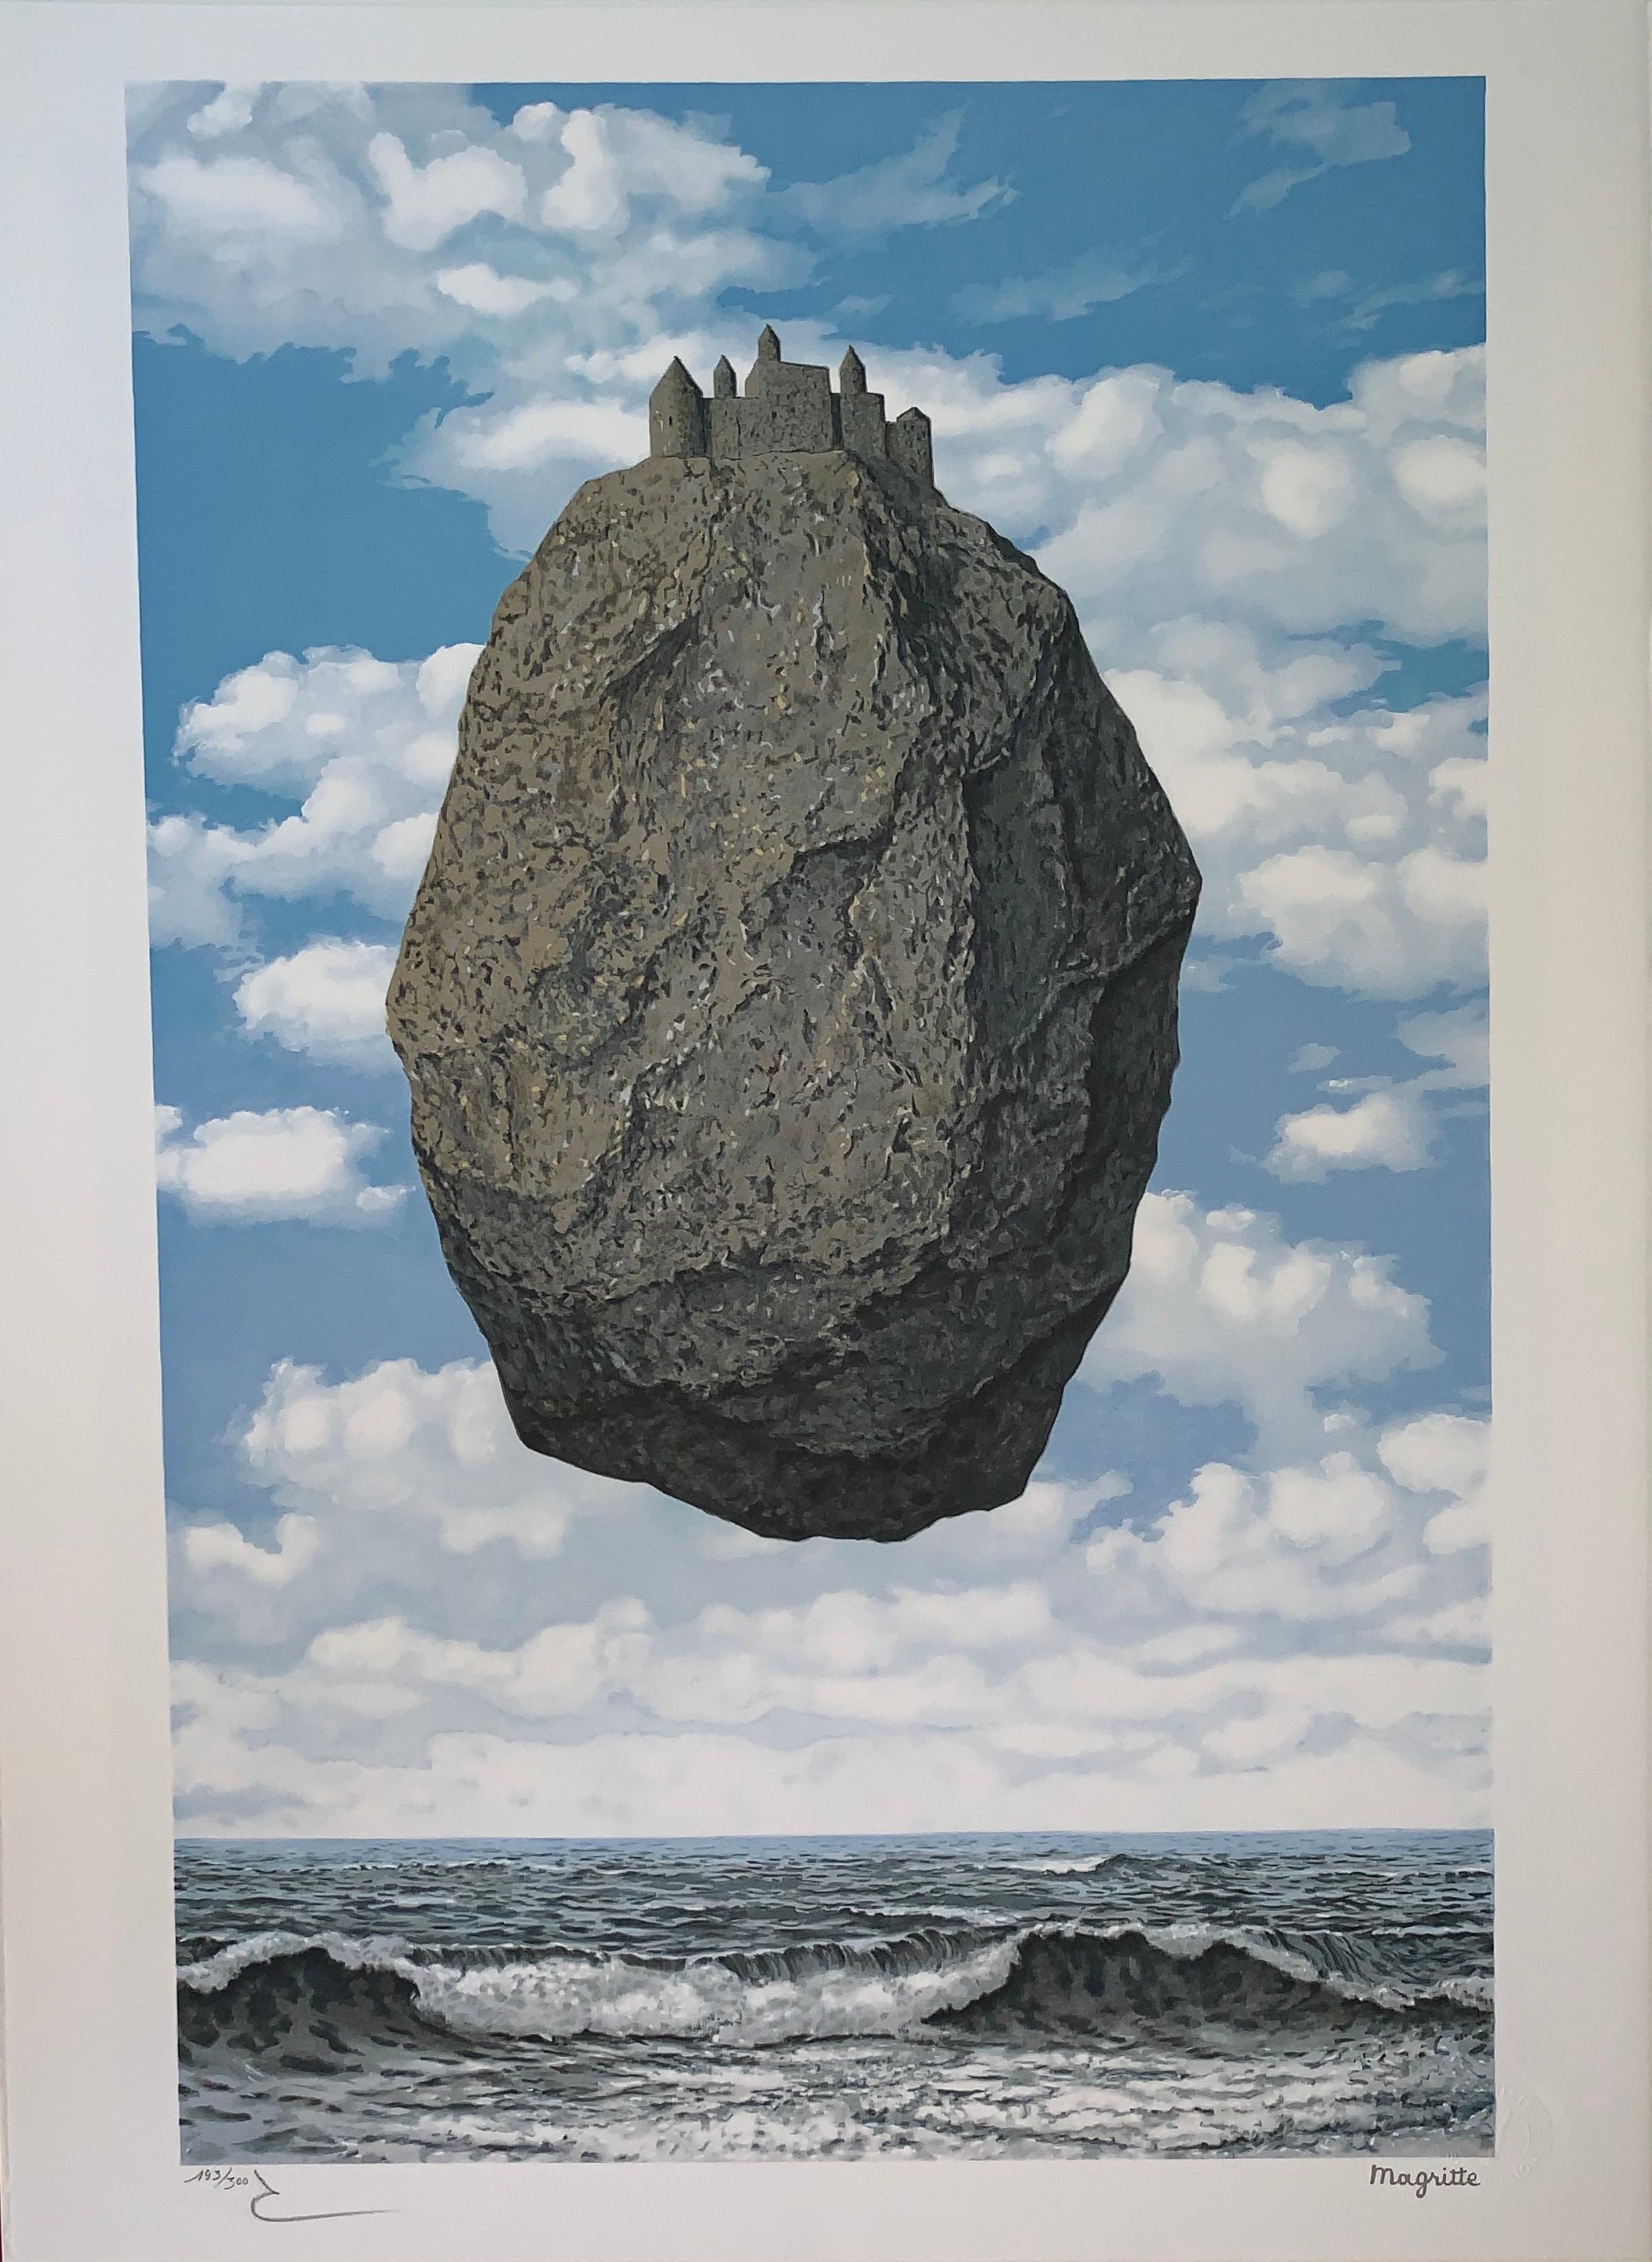 RENE MAGRITTE Surrealism Art Poster or Canvas Print "Time Transfixed" 